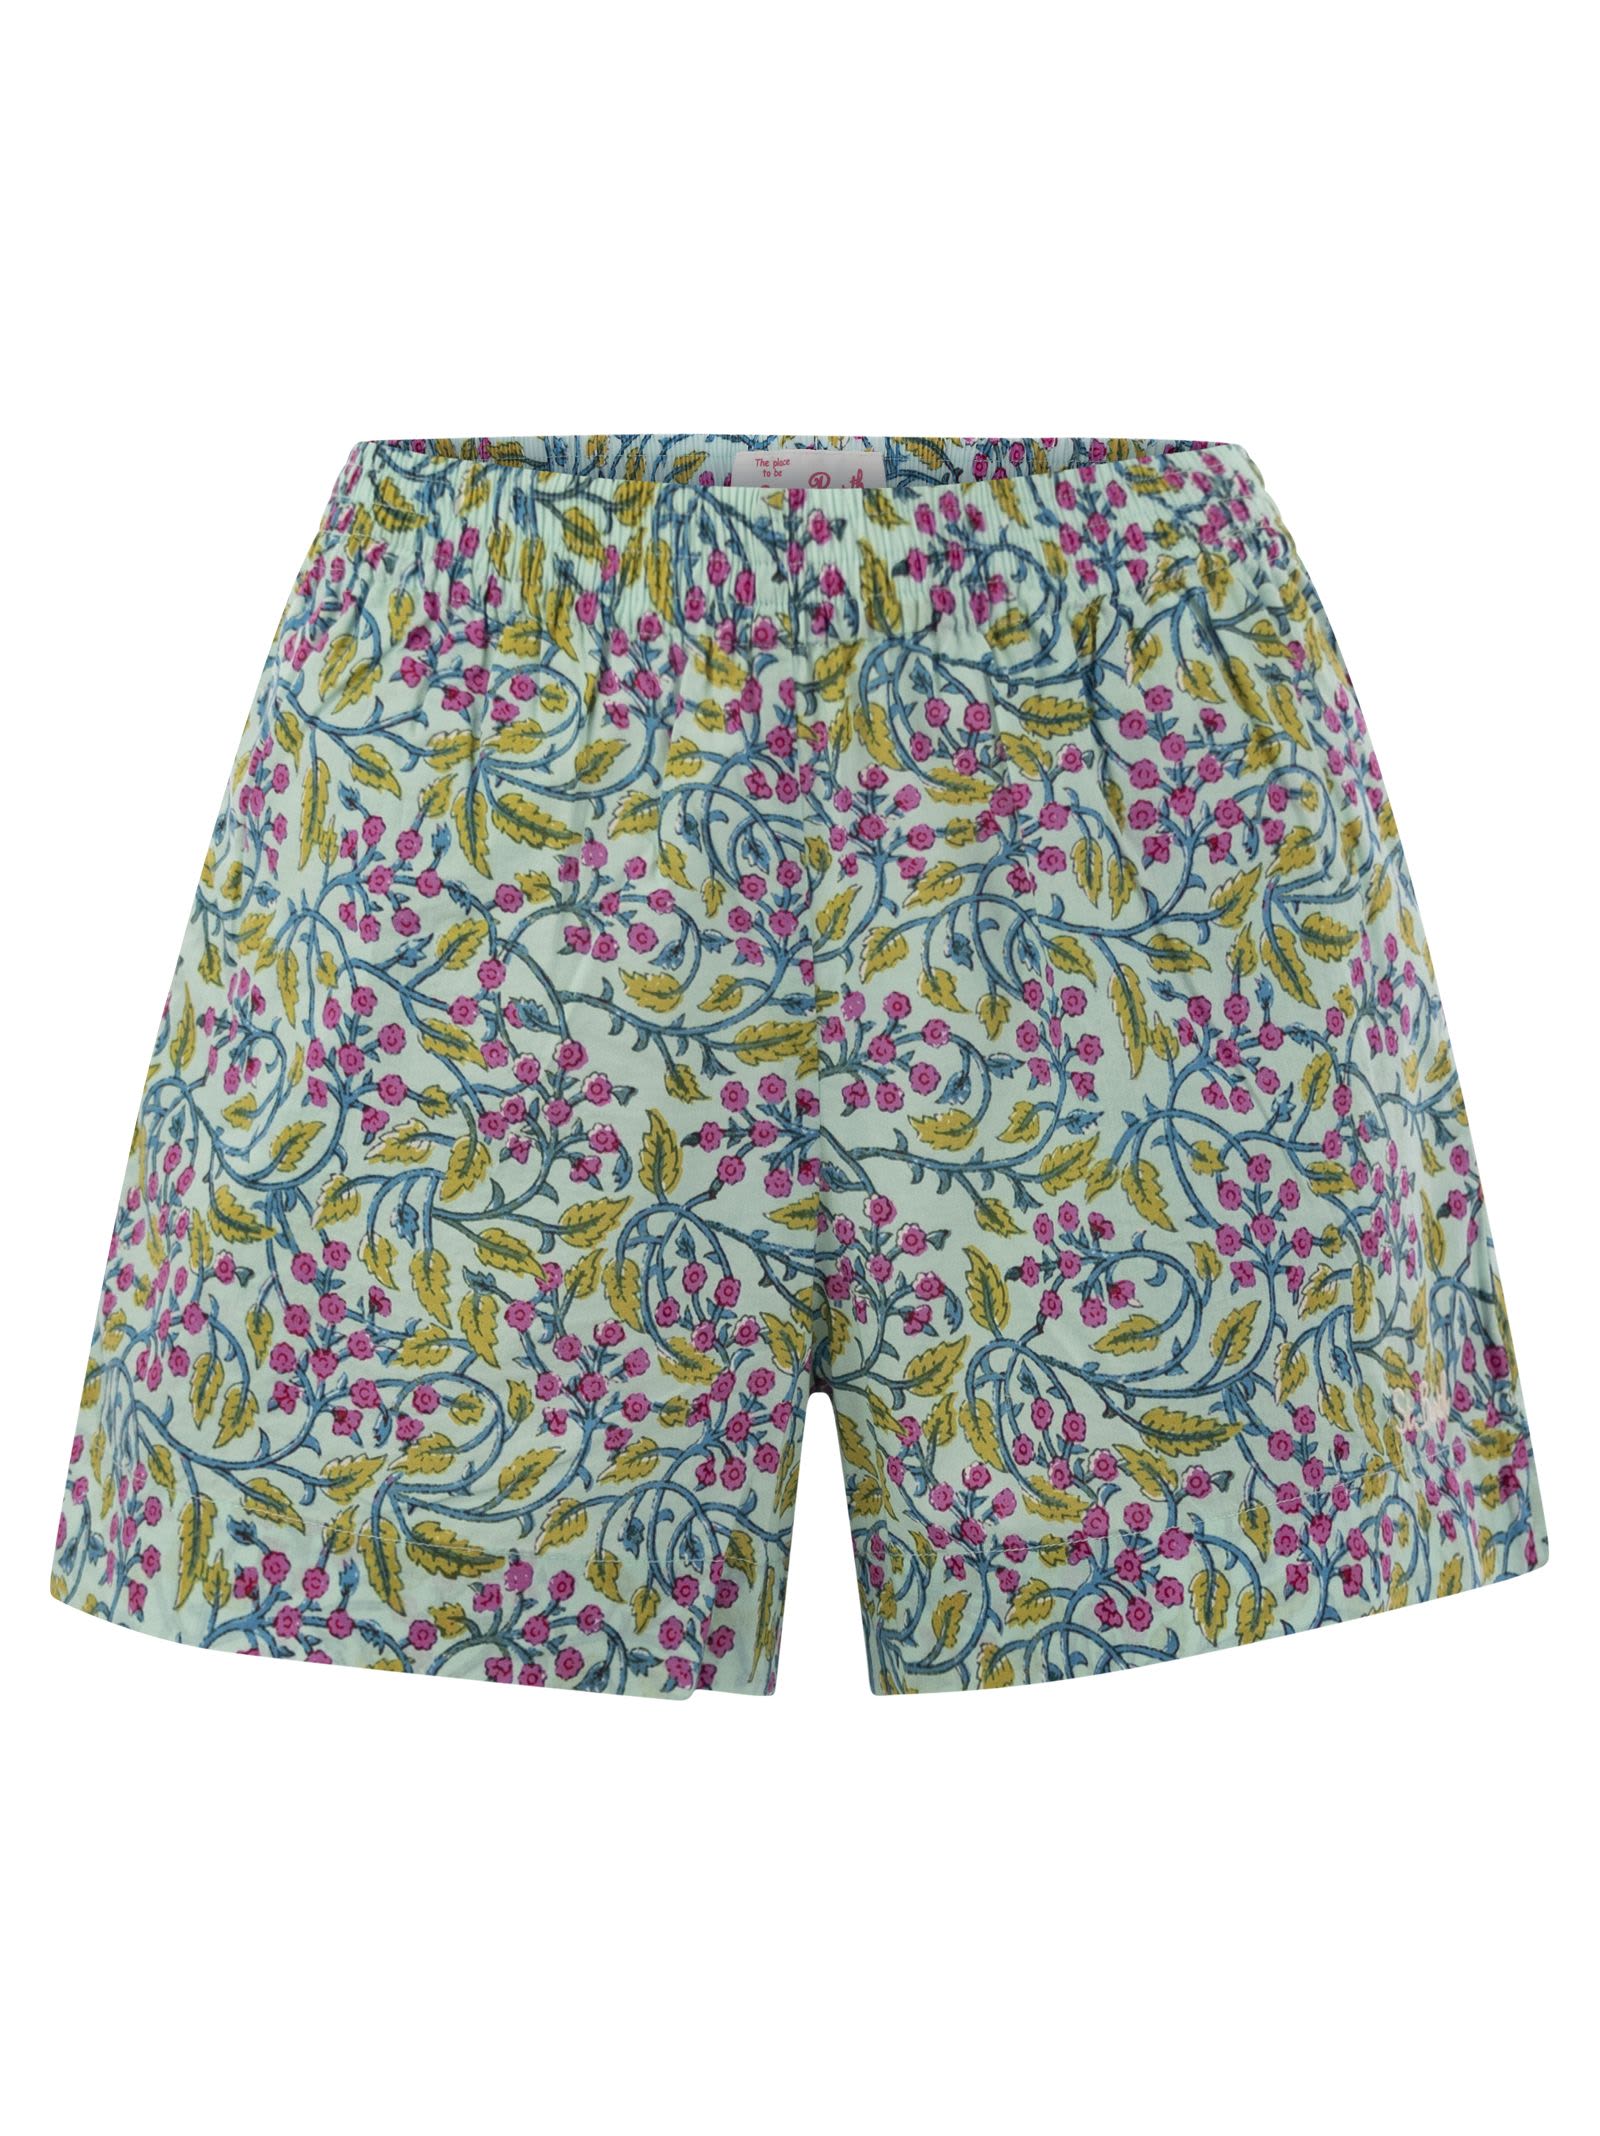 Meave - Cotton Shorts With Floral Pattern Short